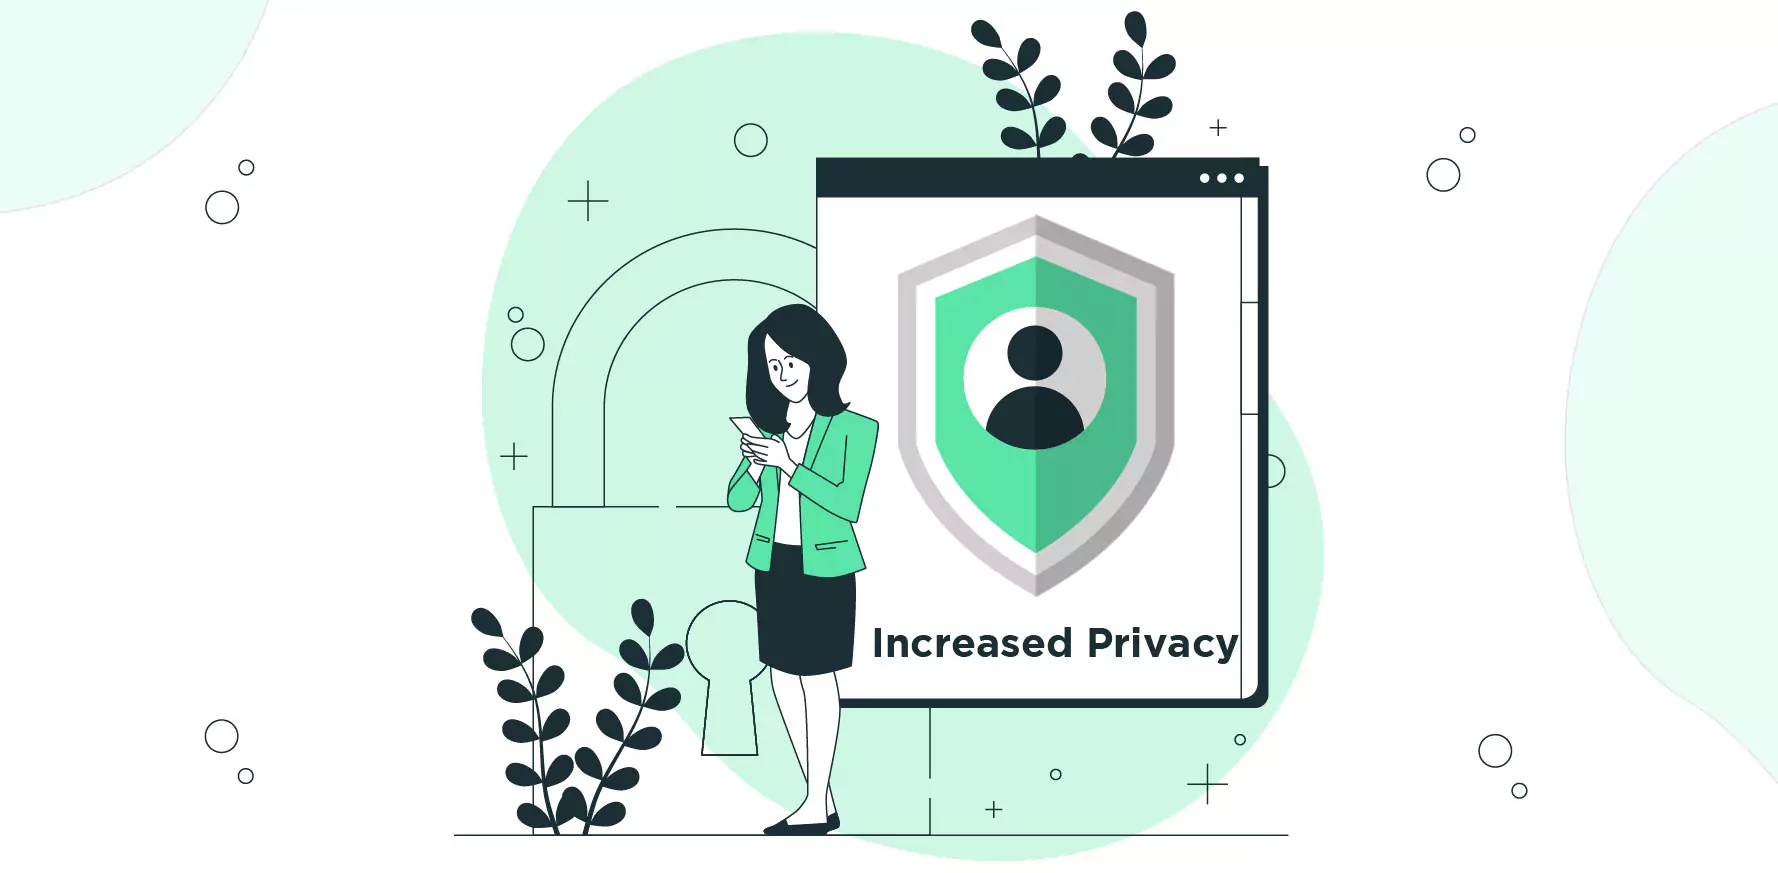  Increased Privacy